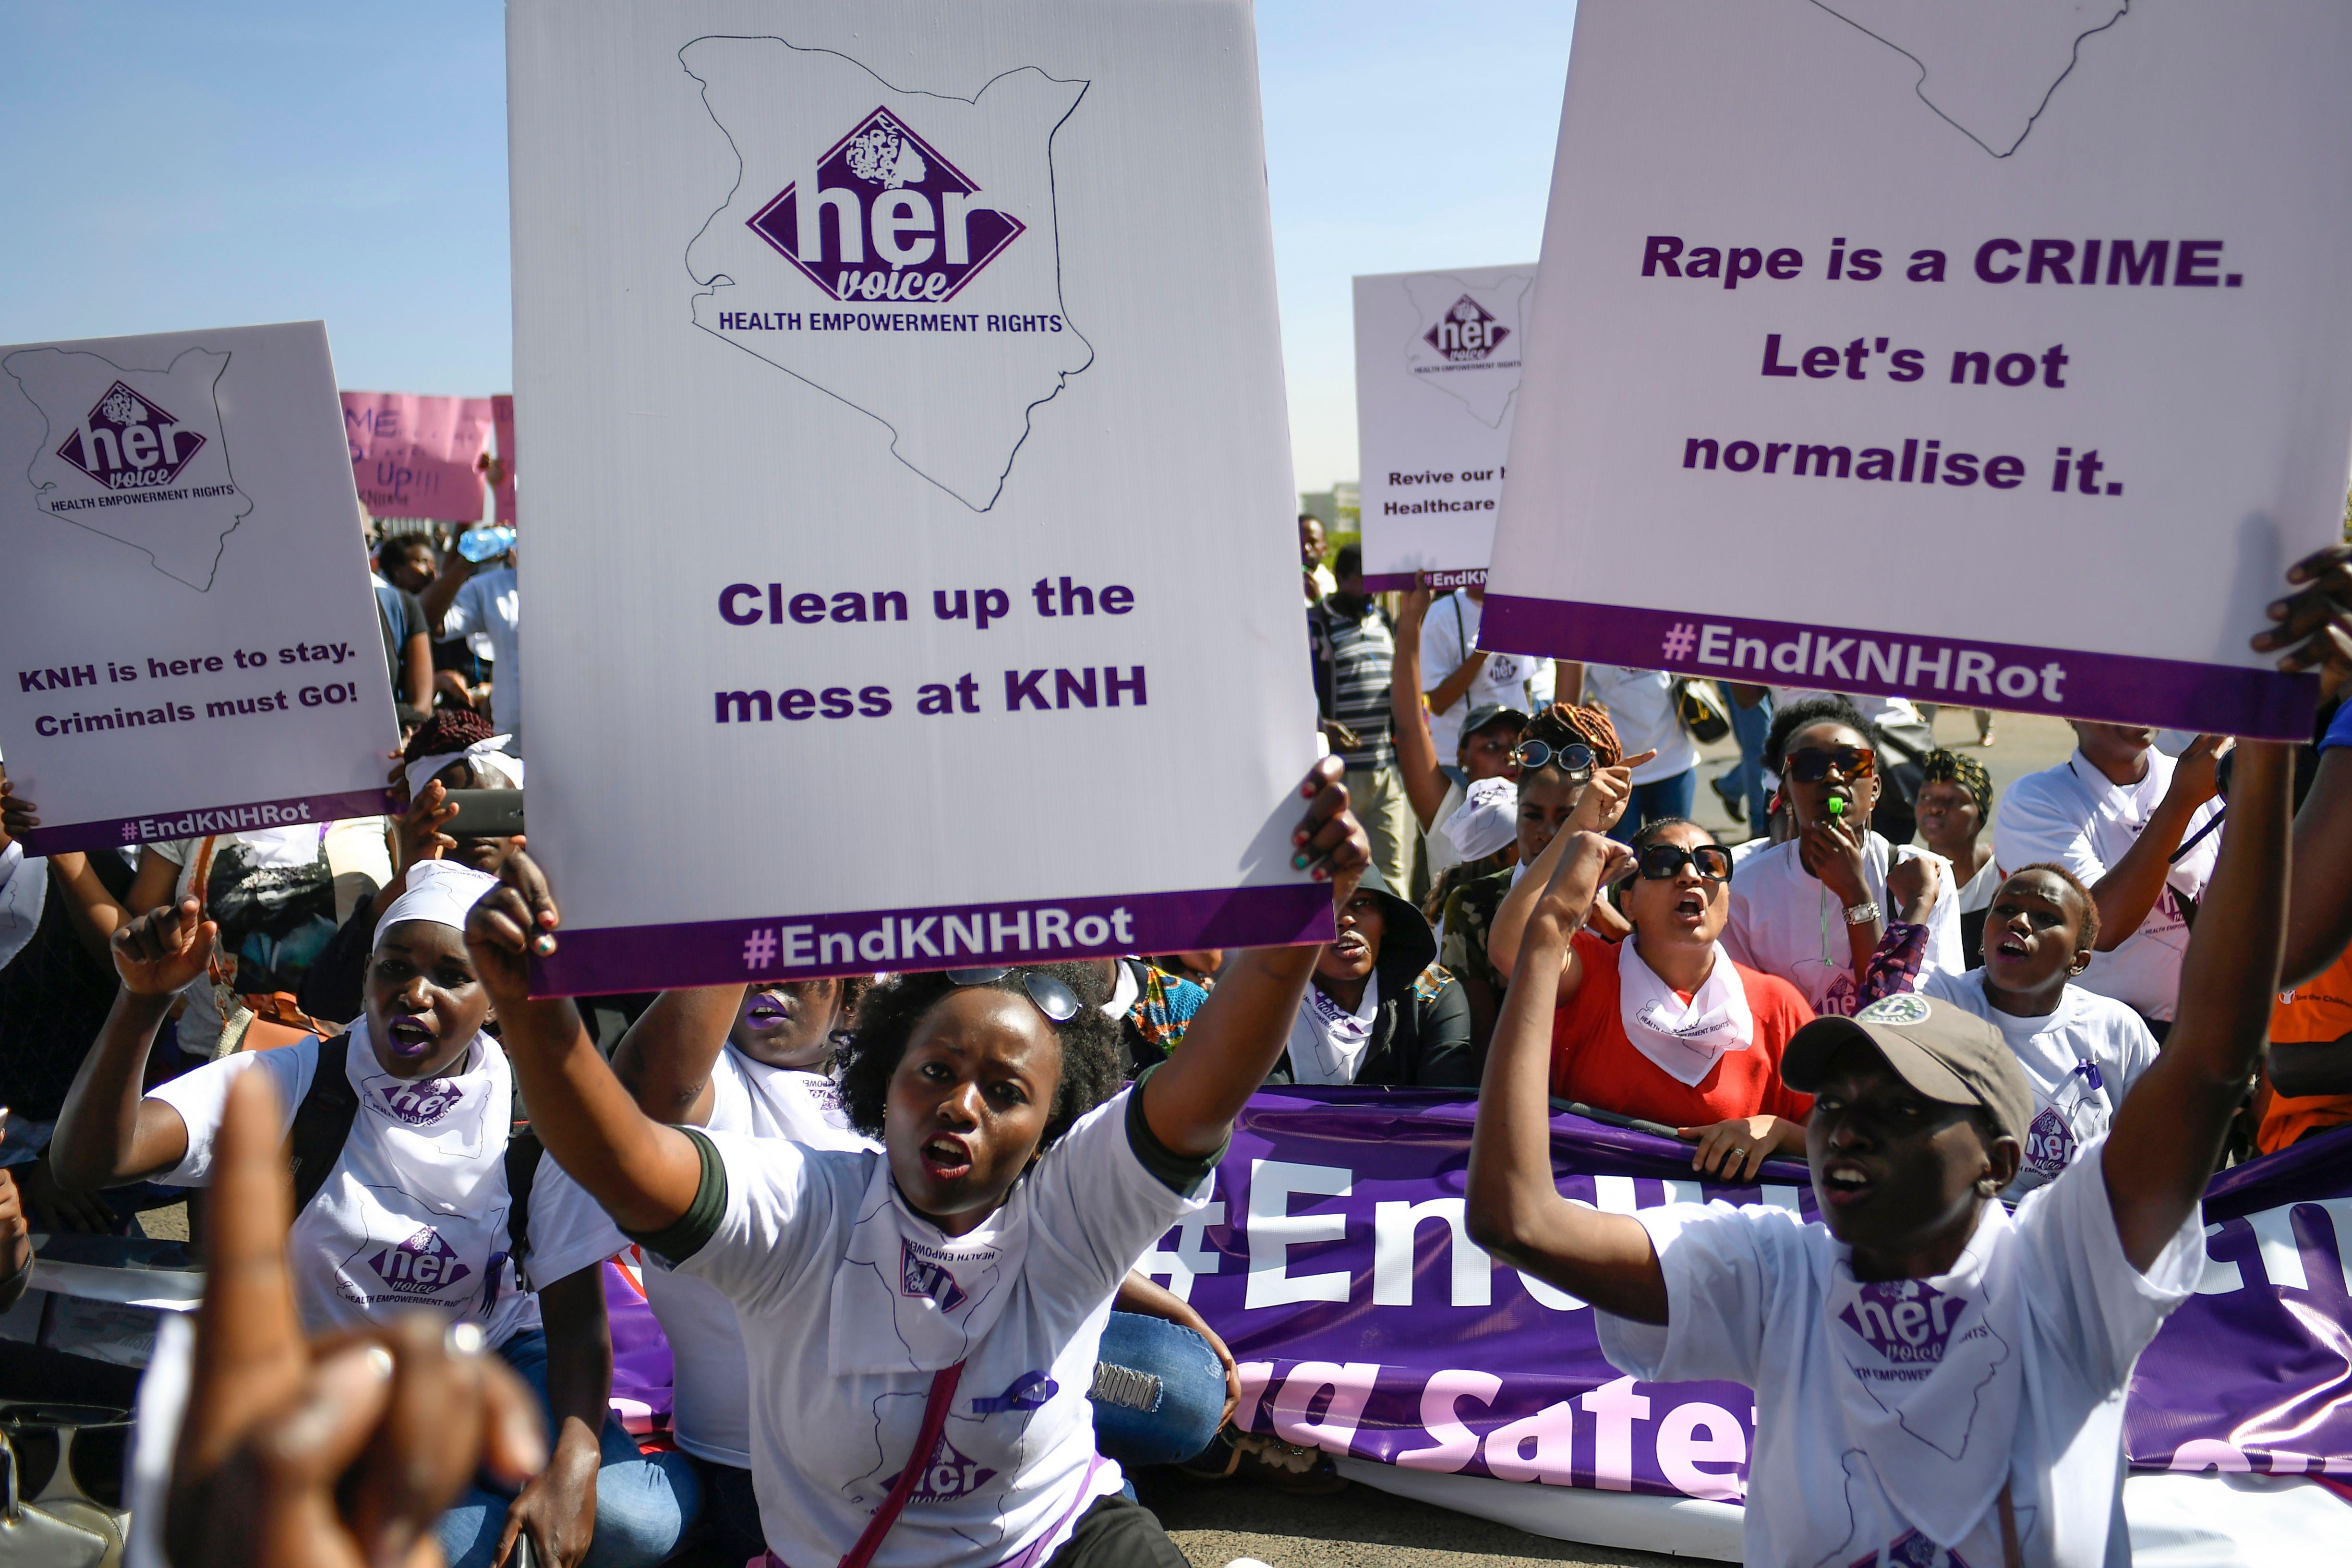 Kenyan women protest on January 23, 2018 against rape allegations at the flagship Kenyatta National Hospital (KNH) in Nairobi.
Kenya's health minister has ordered an investigation into the claims, after social media posts alleged that male staff members targeted the women when they went to feed their babies. / AFP PHOTO / SIMON MAINA        (Photo credit should read SIMON MAINA/AFP/Getty Images)